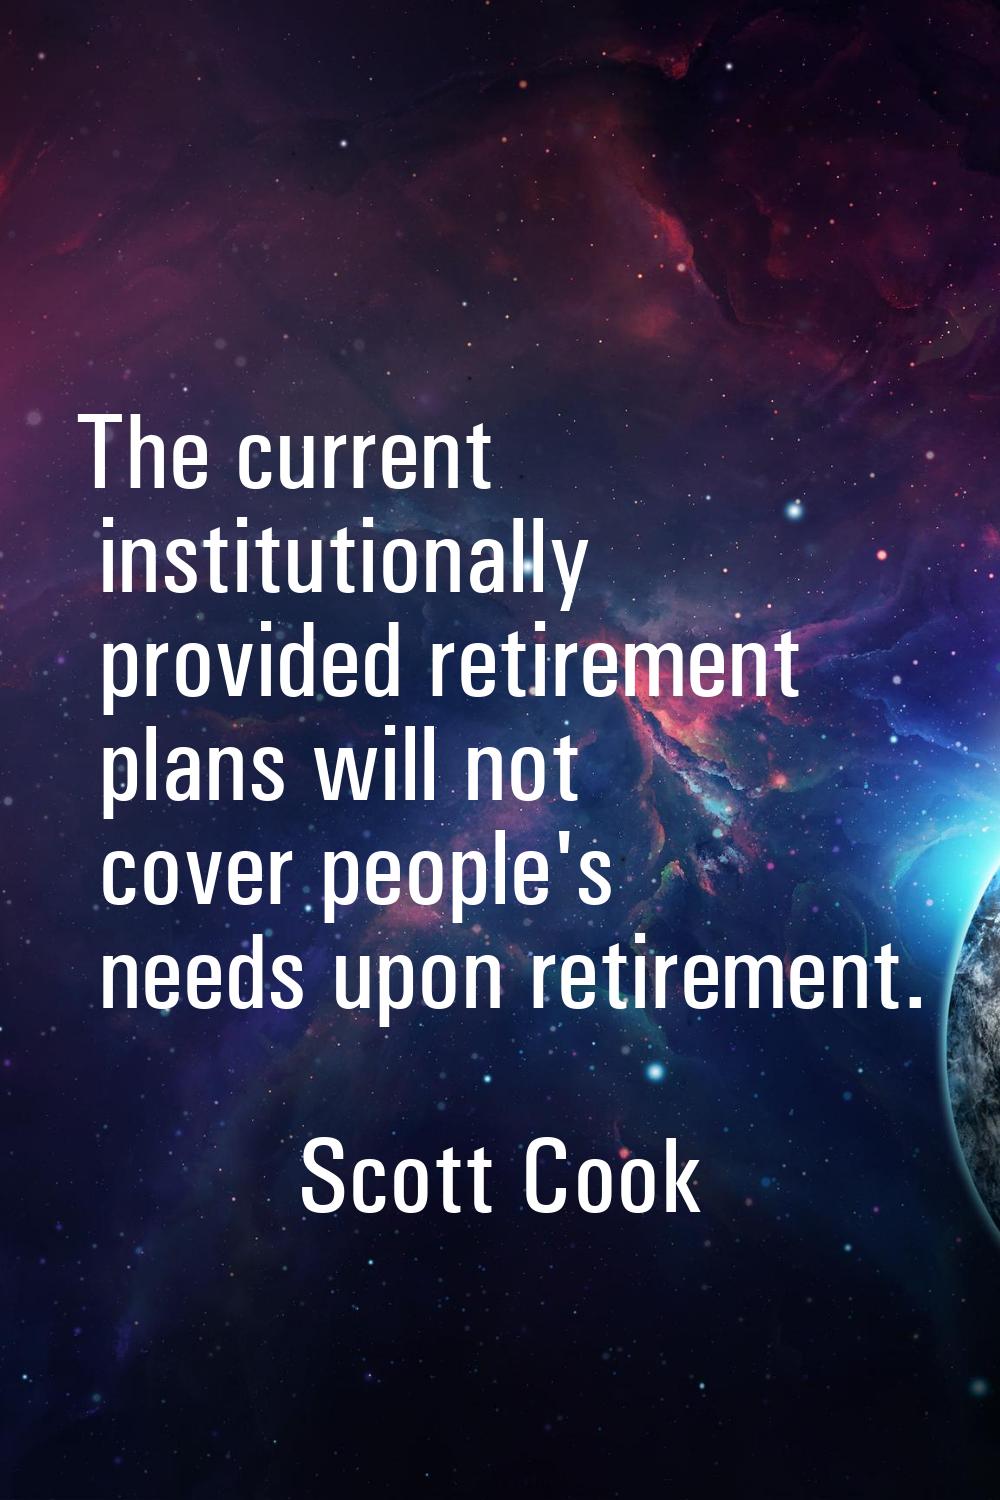 The current institutionally provided retirement plans will not cover people's needs upon retirement